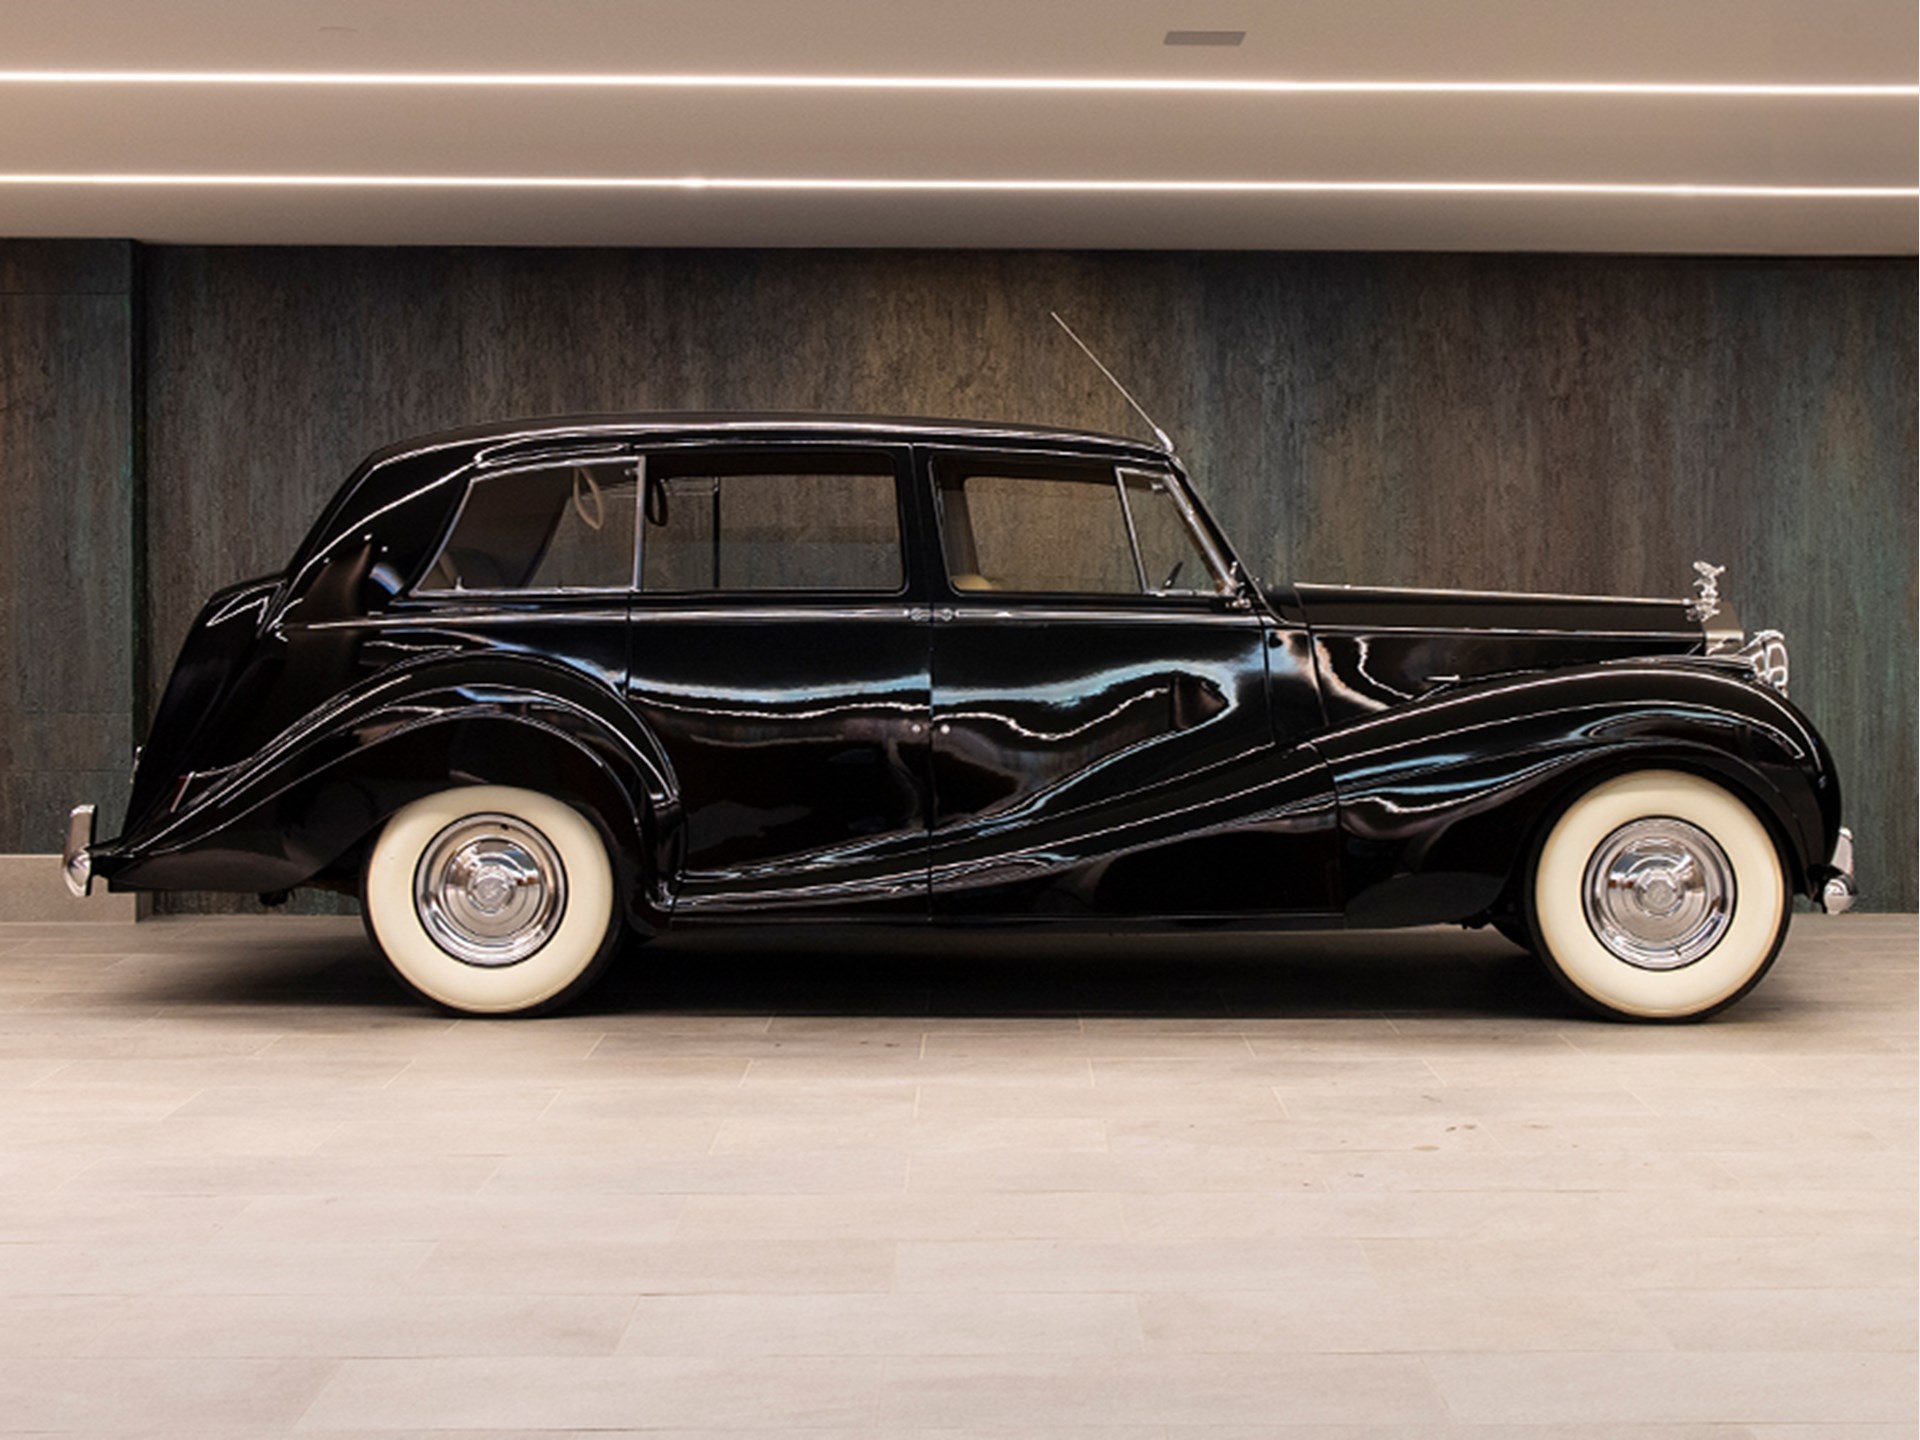 Post-War Rolls: Consummate Elegance, with Rolls-Royce Examples Representing  Two Centuries of Luxury | RM Sotheby's